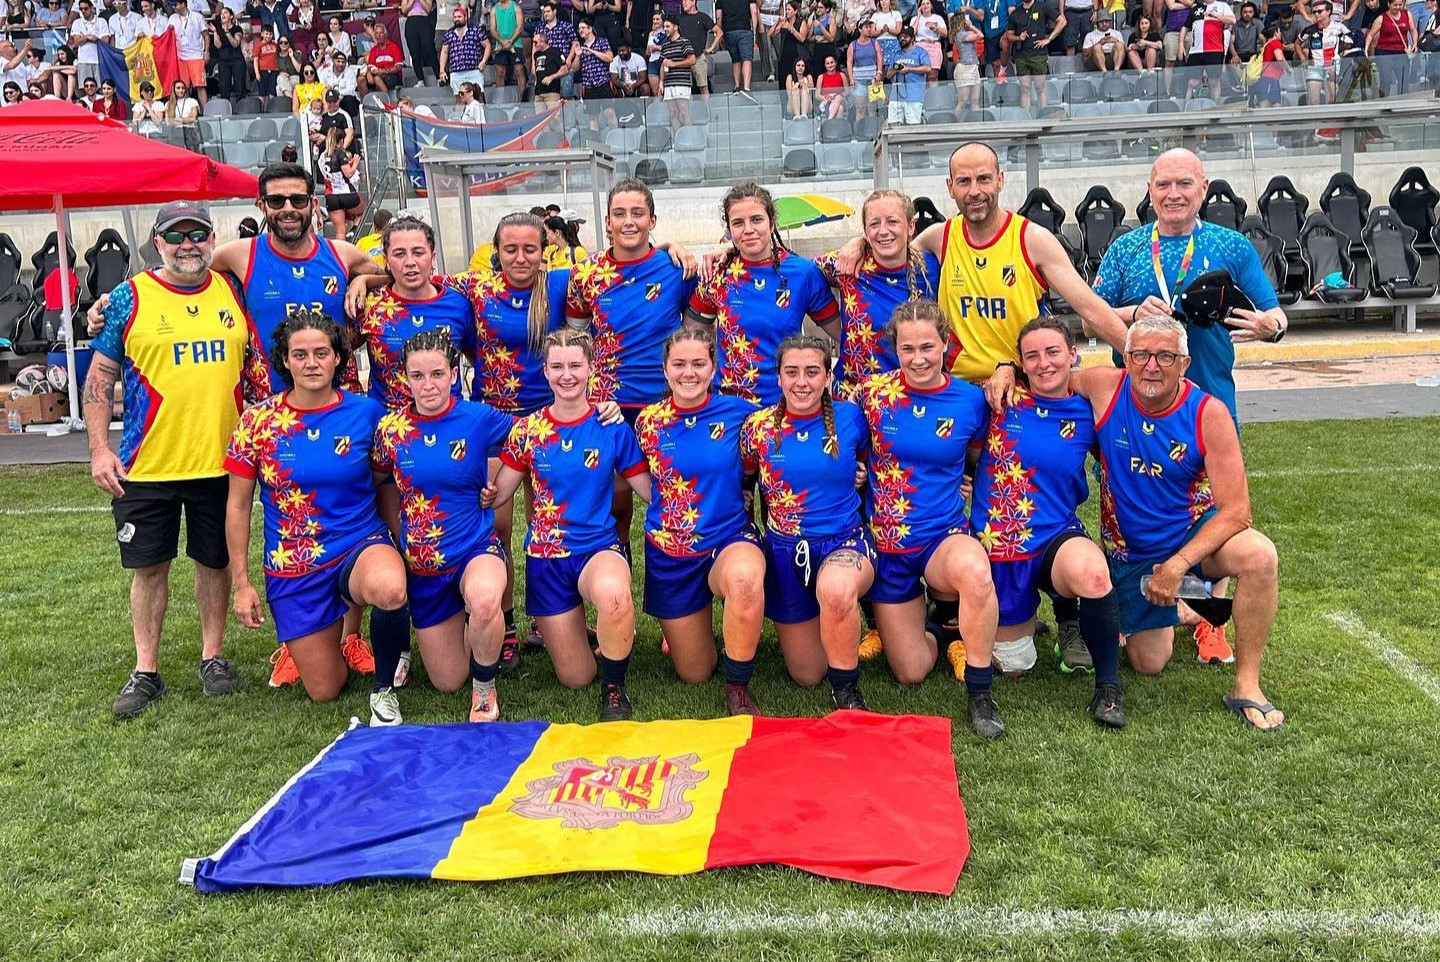 Andorra pipped Malta to rugby sevens gold on the penultimate day of the Games of the Small States of Europe ©Federació Andorrana de Rugby